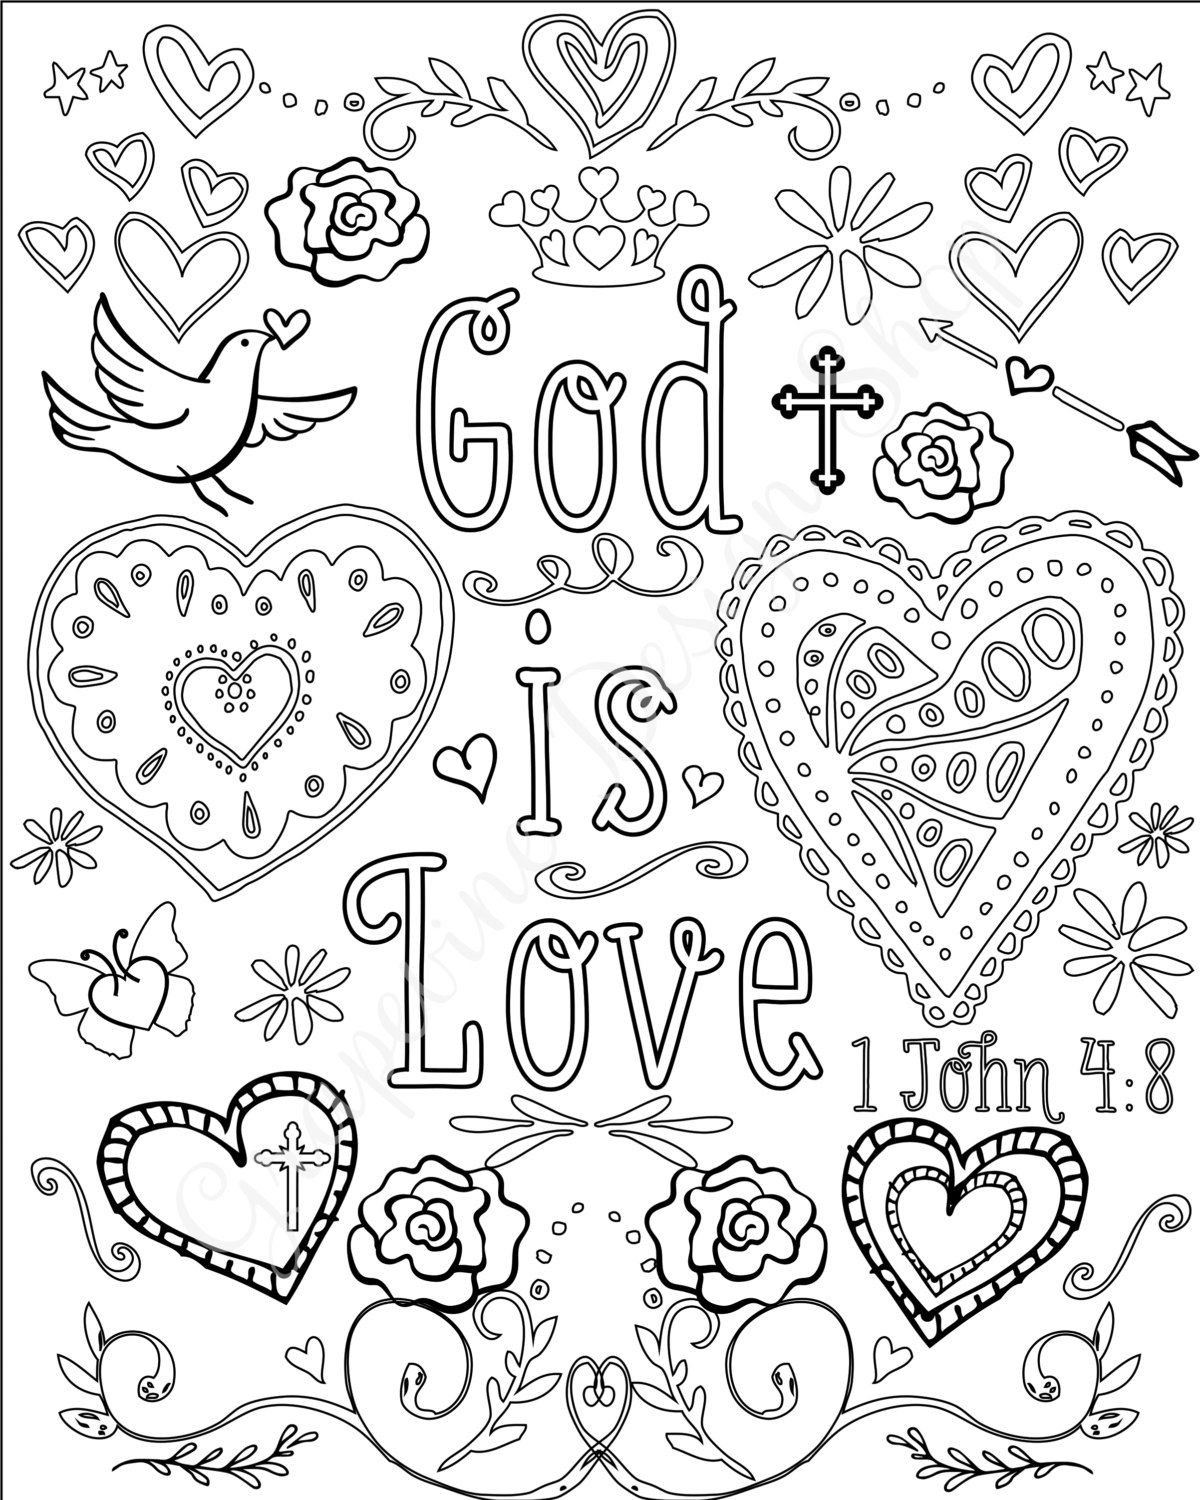 Bible Coloring Pages For Adults Pdf
 Bible verse coloring pages Set of 5 Instant